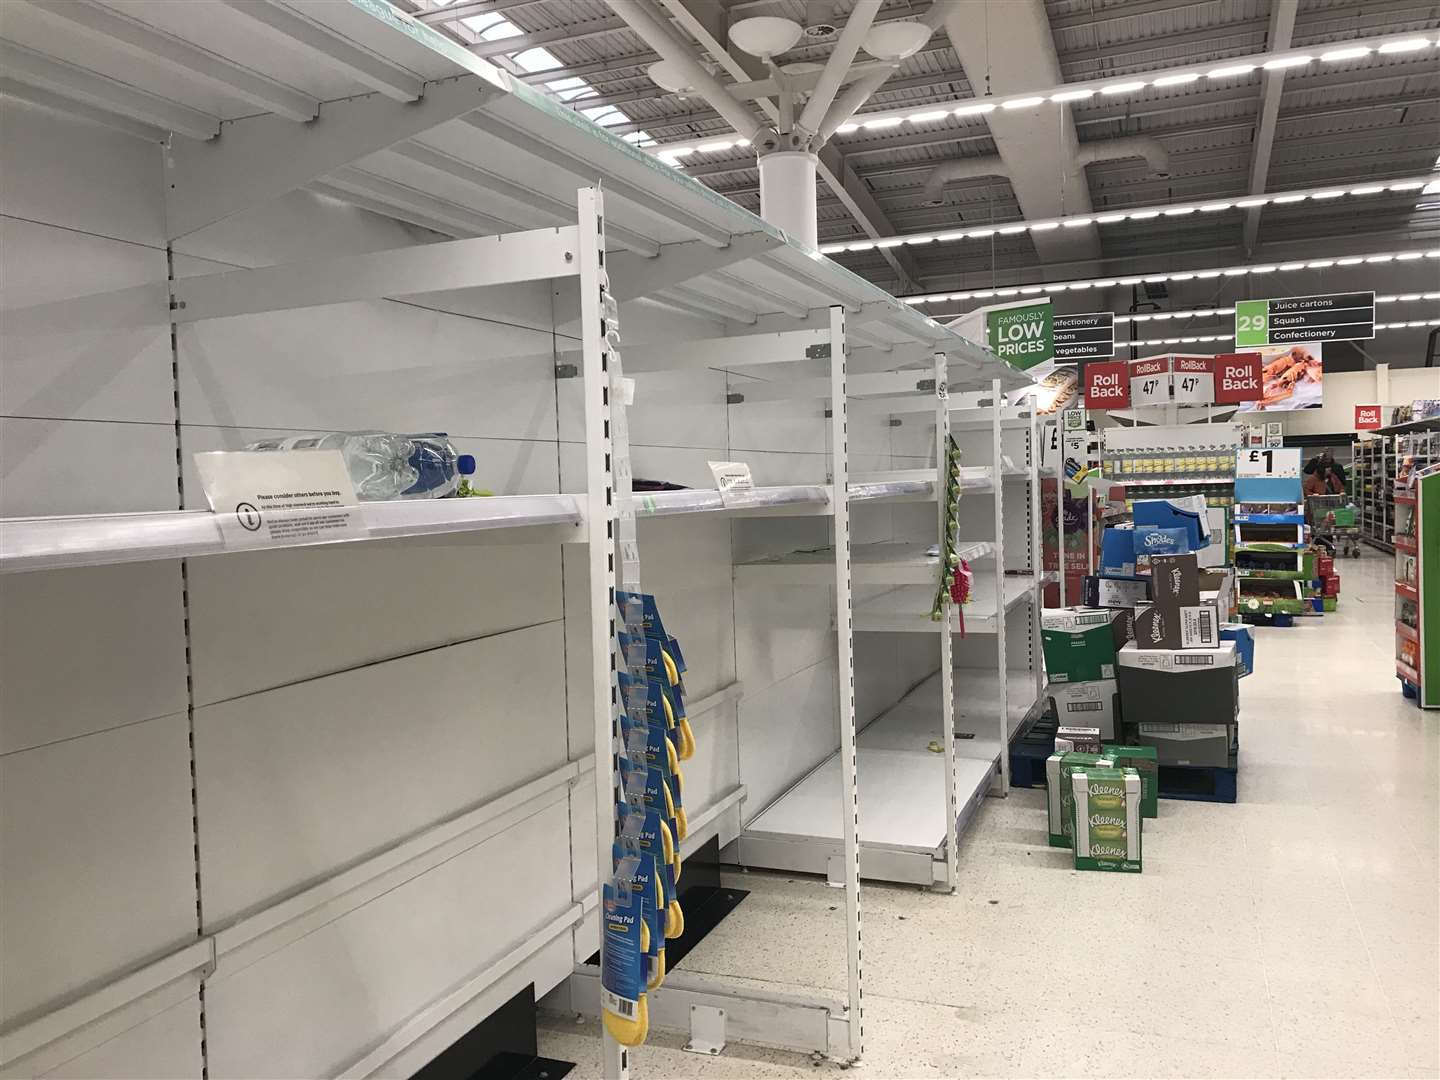 Many of the shelves were empty when the doors to Asda opened on Wednesday morning